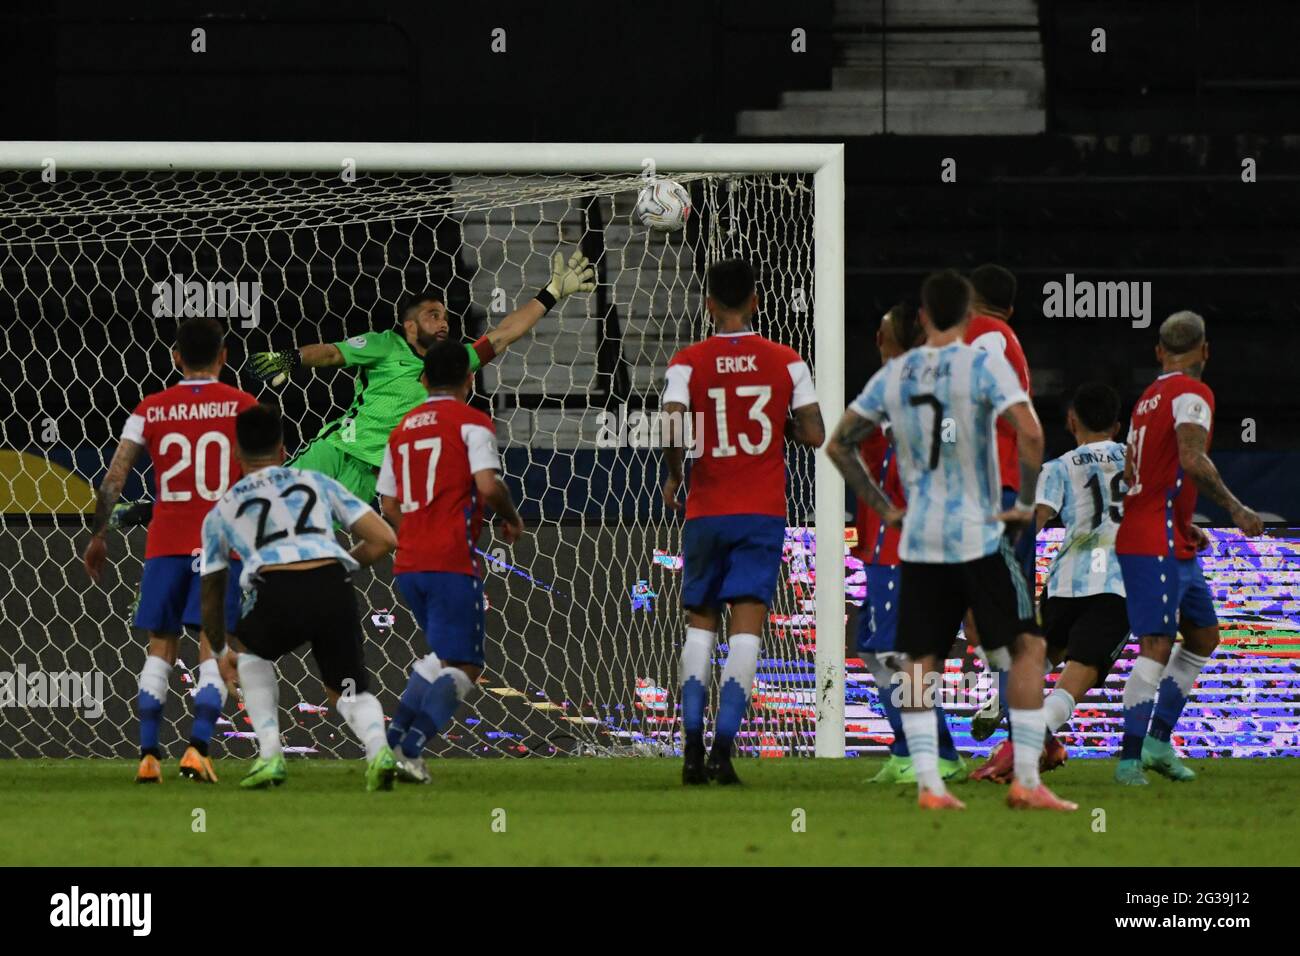 Rio De Janeiro, Brazil. 14th June, 2021. Football: Copa America, preliminary round, Group A, Matchday 1, Argentina - Chile, Nilson Santos Stadium. Chile goalkeeper Gabriel Arias can't stop Messi's first goal. Credit: Alexandre Brum/dpa/Alamy Live News Stock Photo